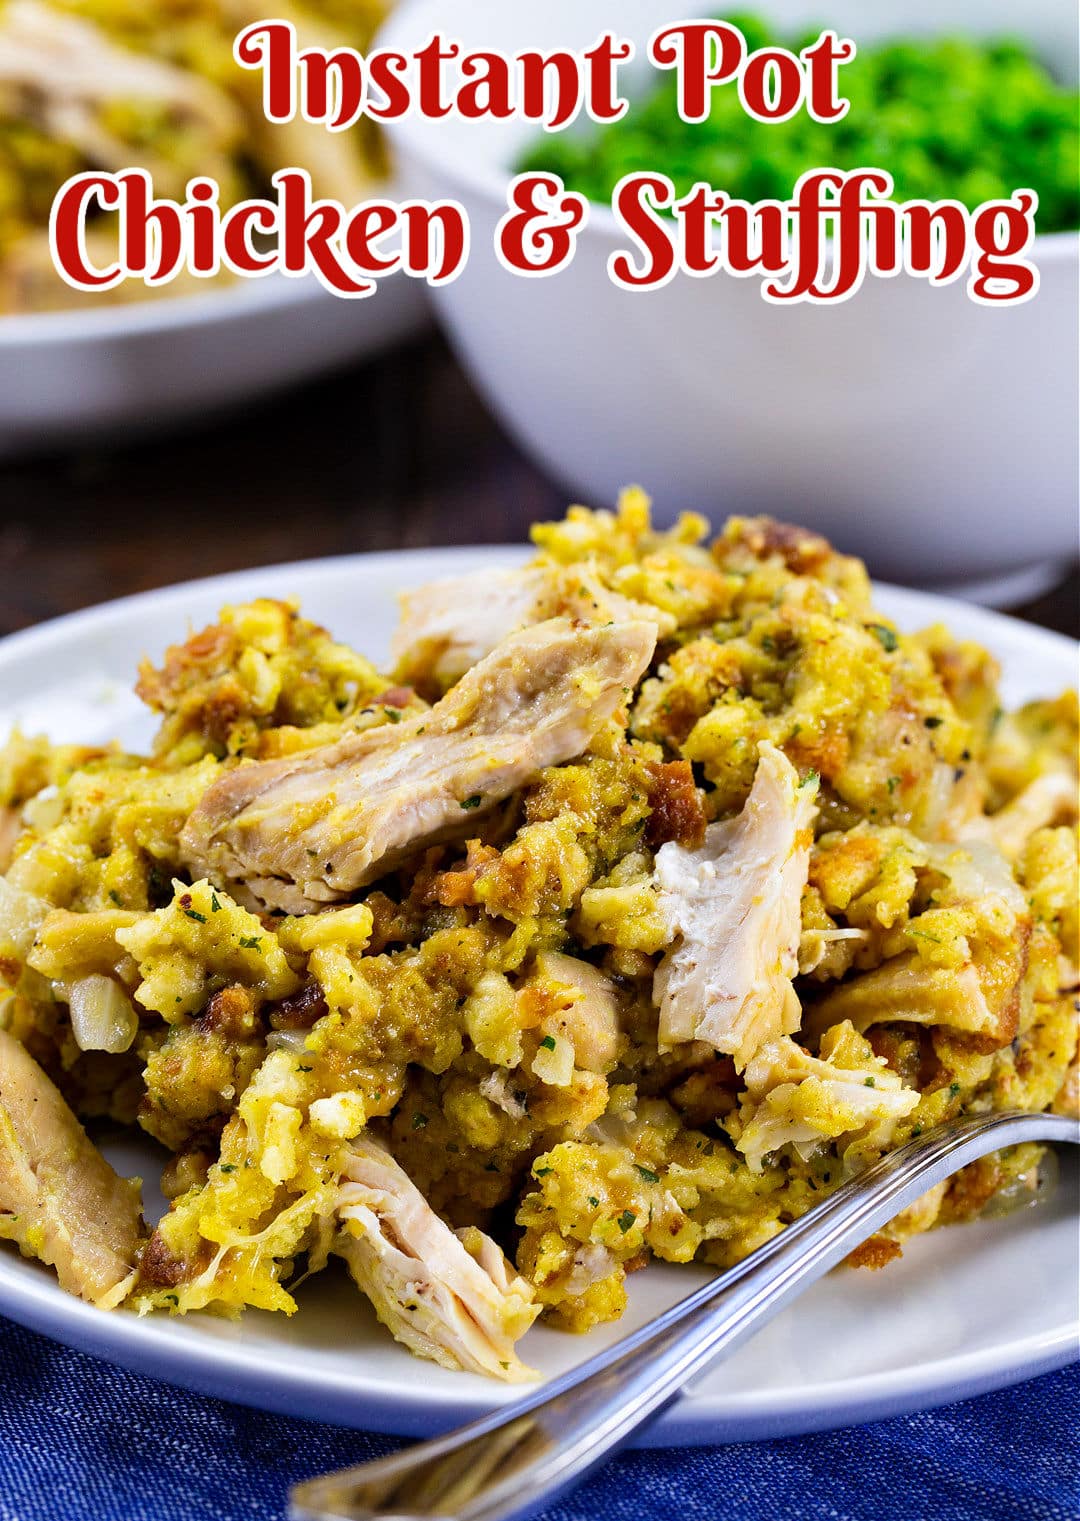 Instant Pot Chicken and Stuffing dished up on a plate.